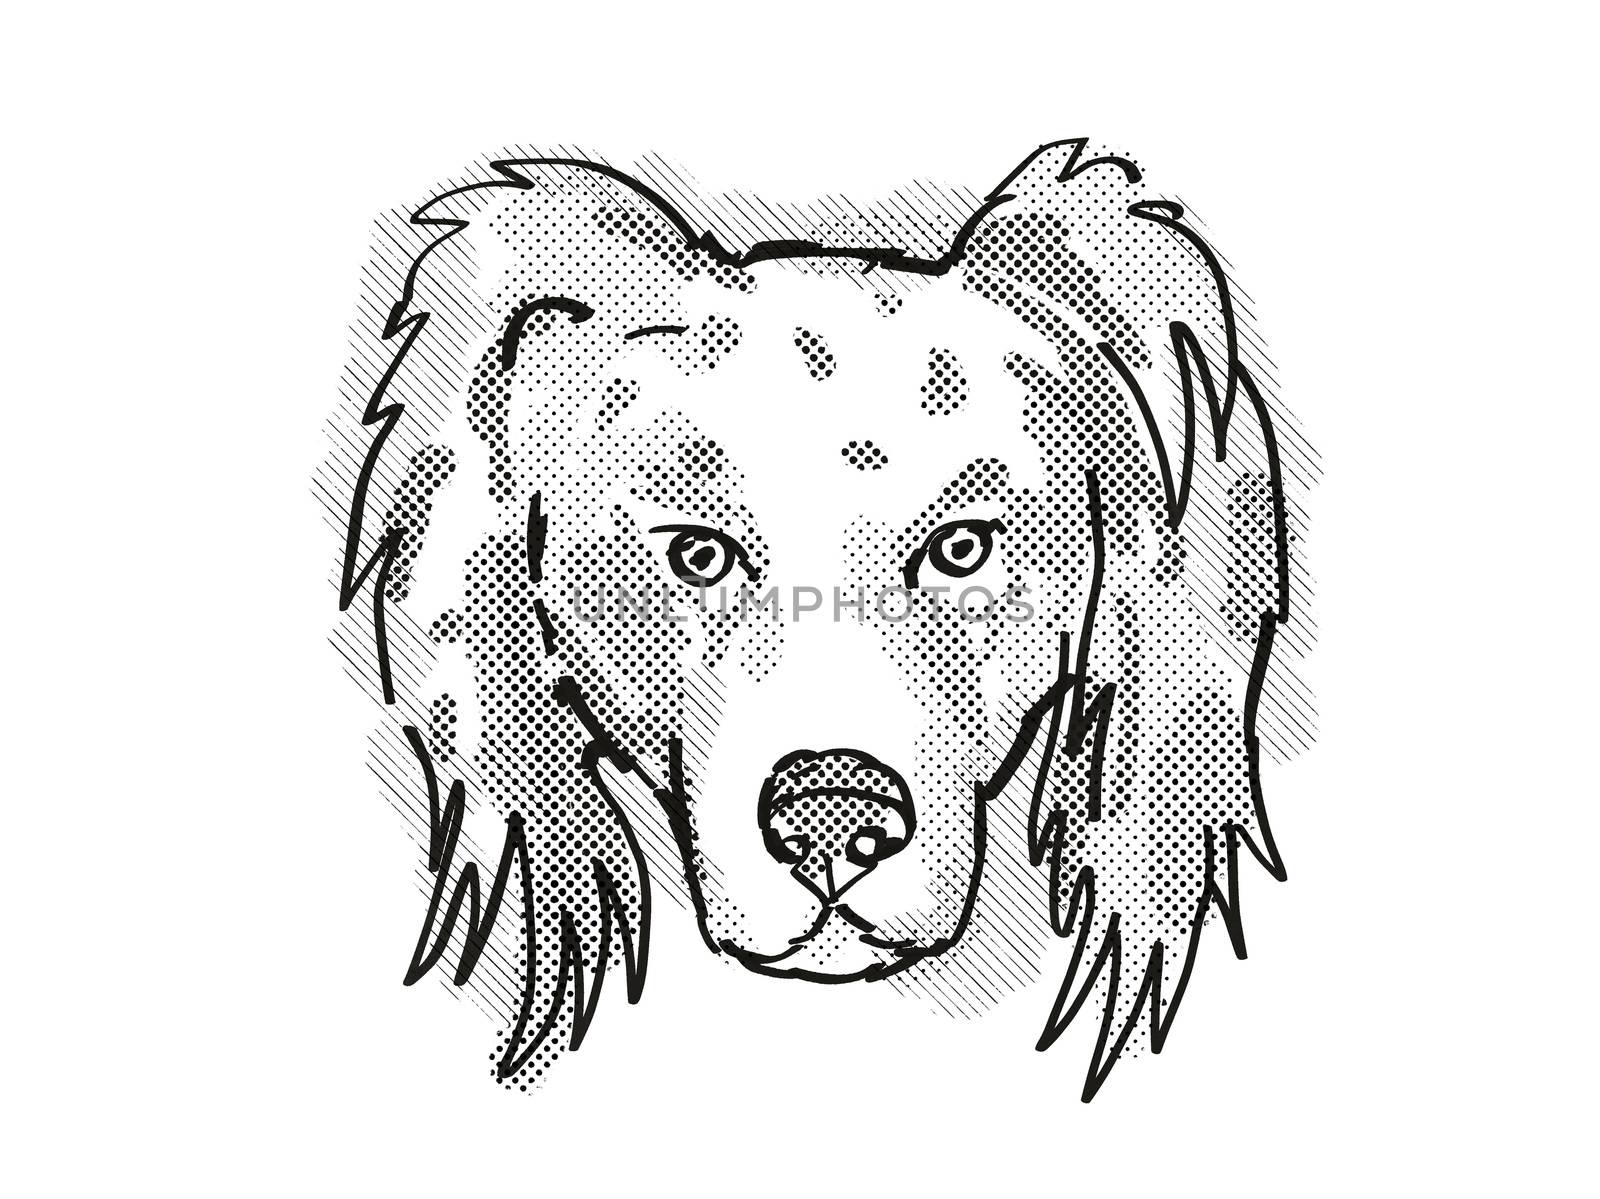 Retro cartoon style drawing of head of an Australian Shepherd dog  , a domestic dog or canine breed on isolated white background done in black and white.